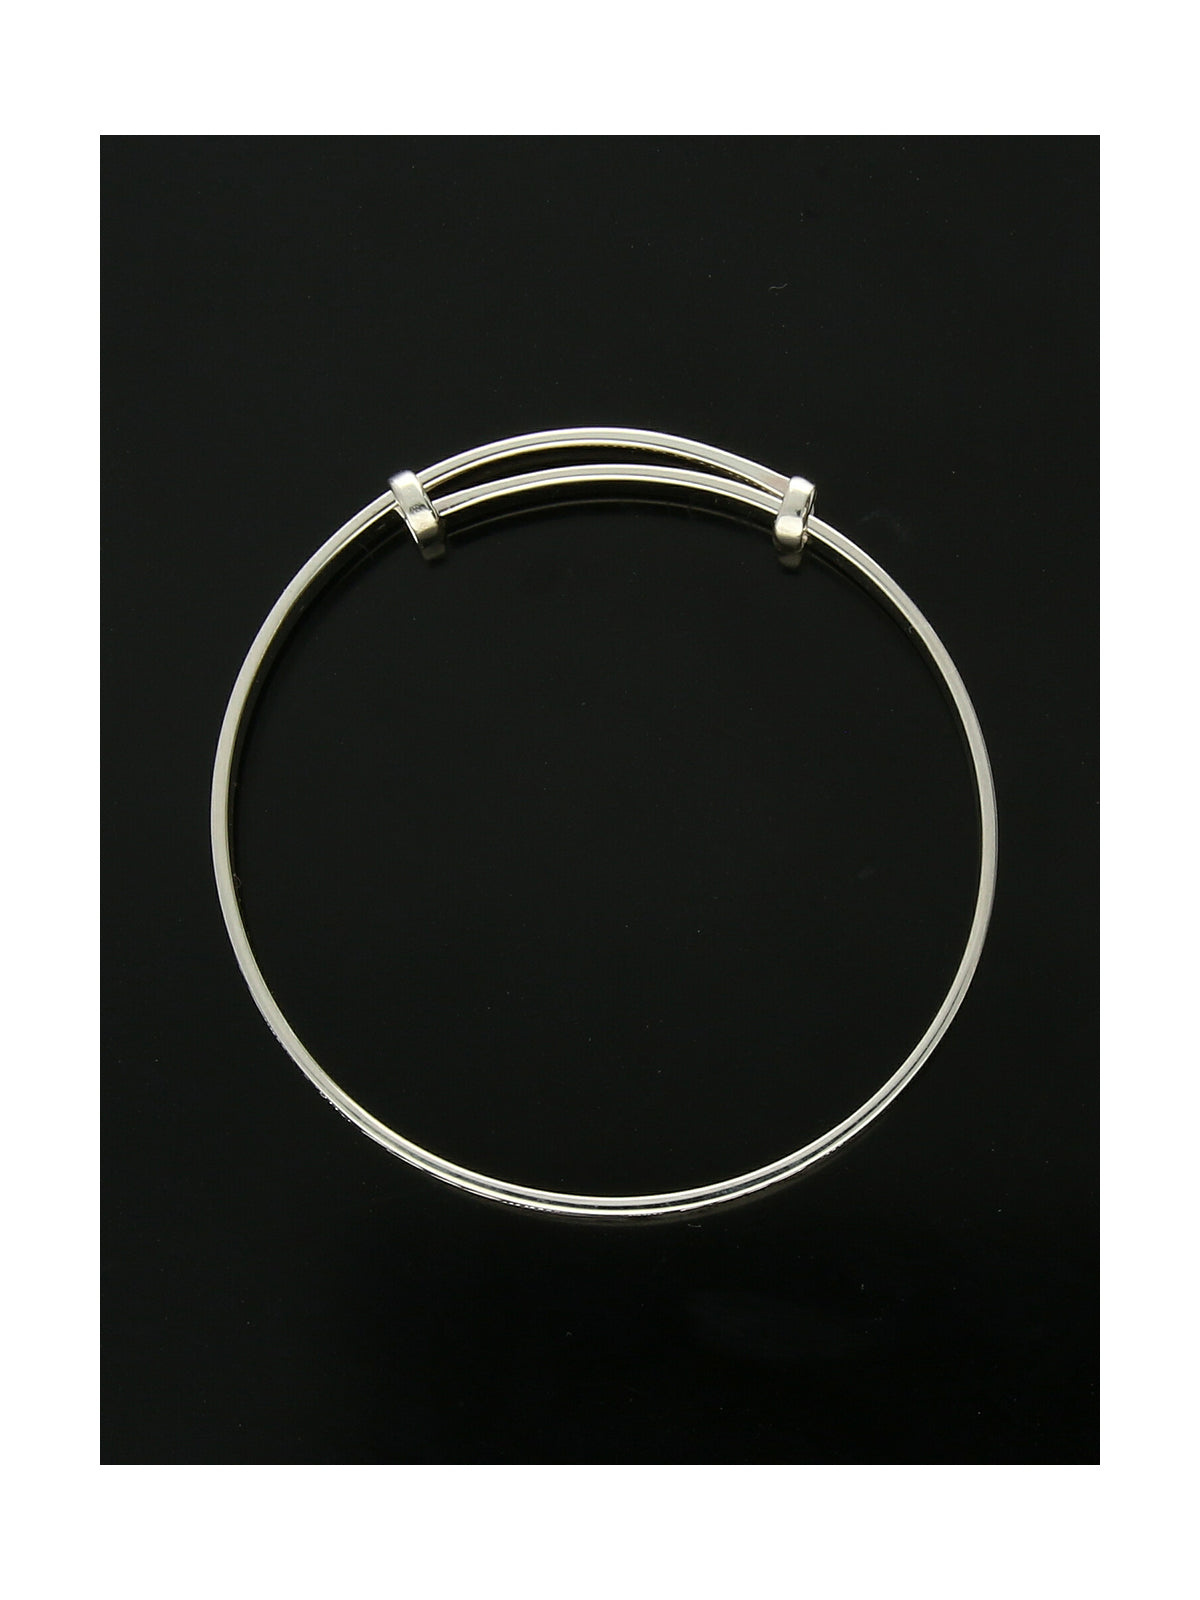 Child's Engraved Bangle in Silver